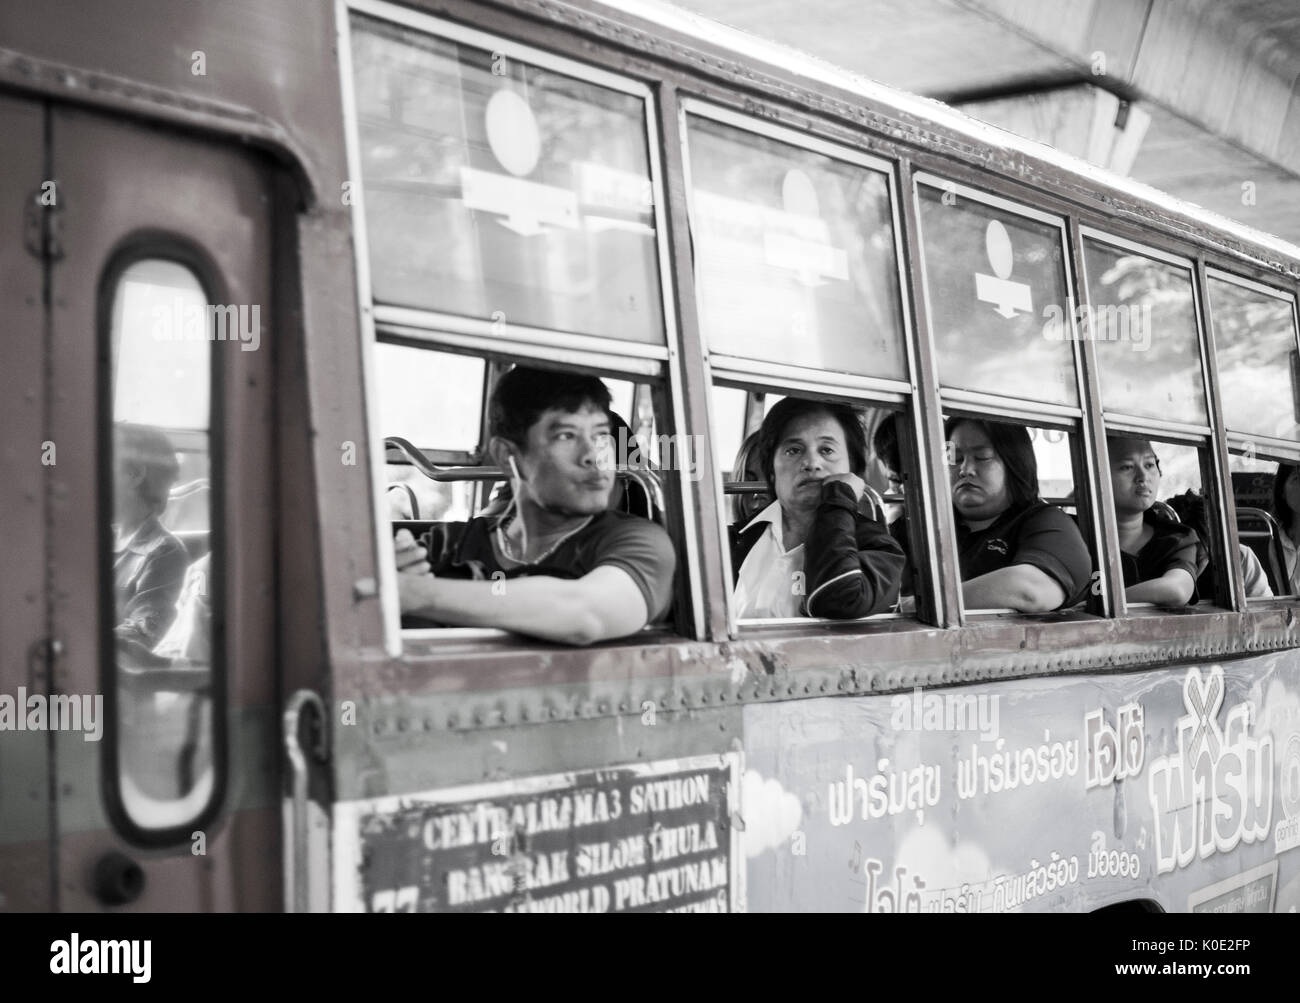 Thailand, Bangkok/ Passengers look out the window of a bus Stock Photo